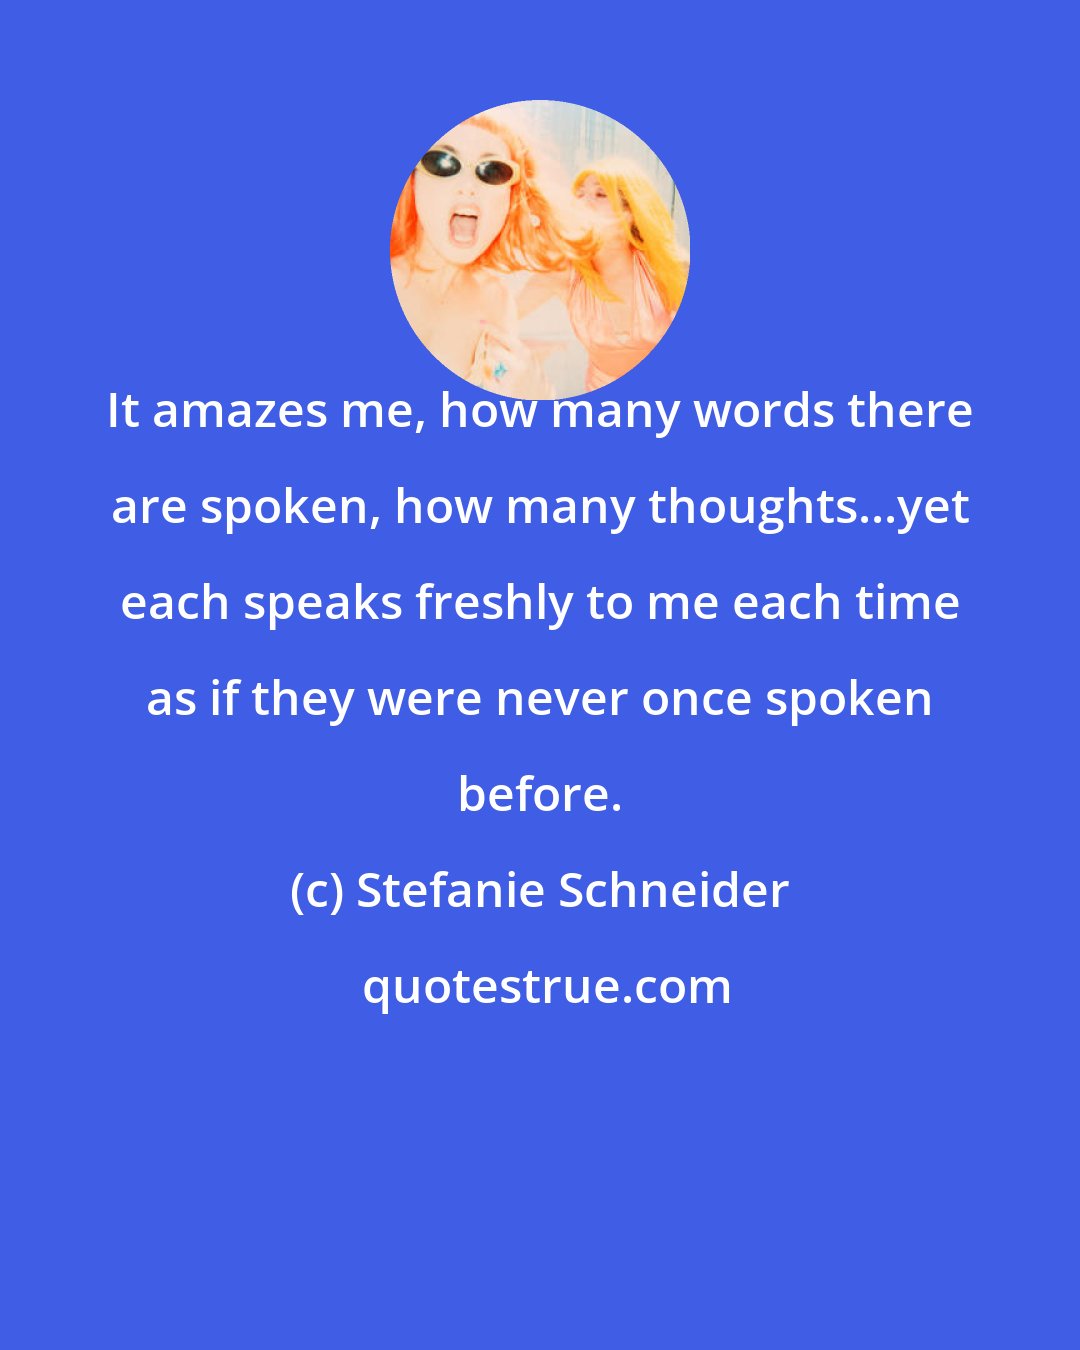 Stefanie Schneider: It amazes me, how many words there are spoken, how many thoughts...yet each speaks freshly to me each time as if they were never once spoken before.